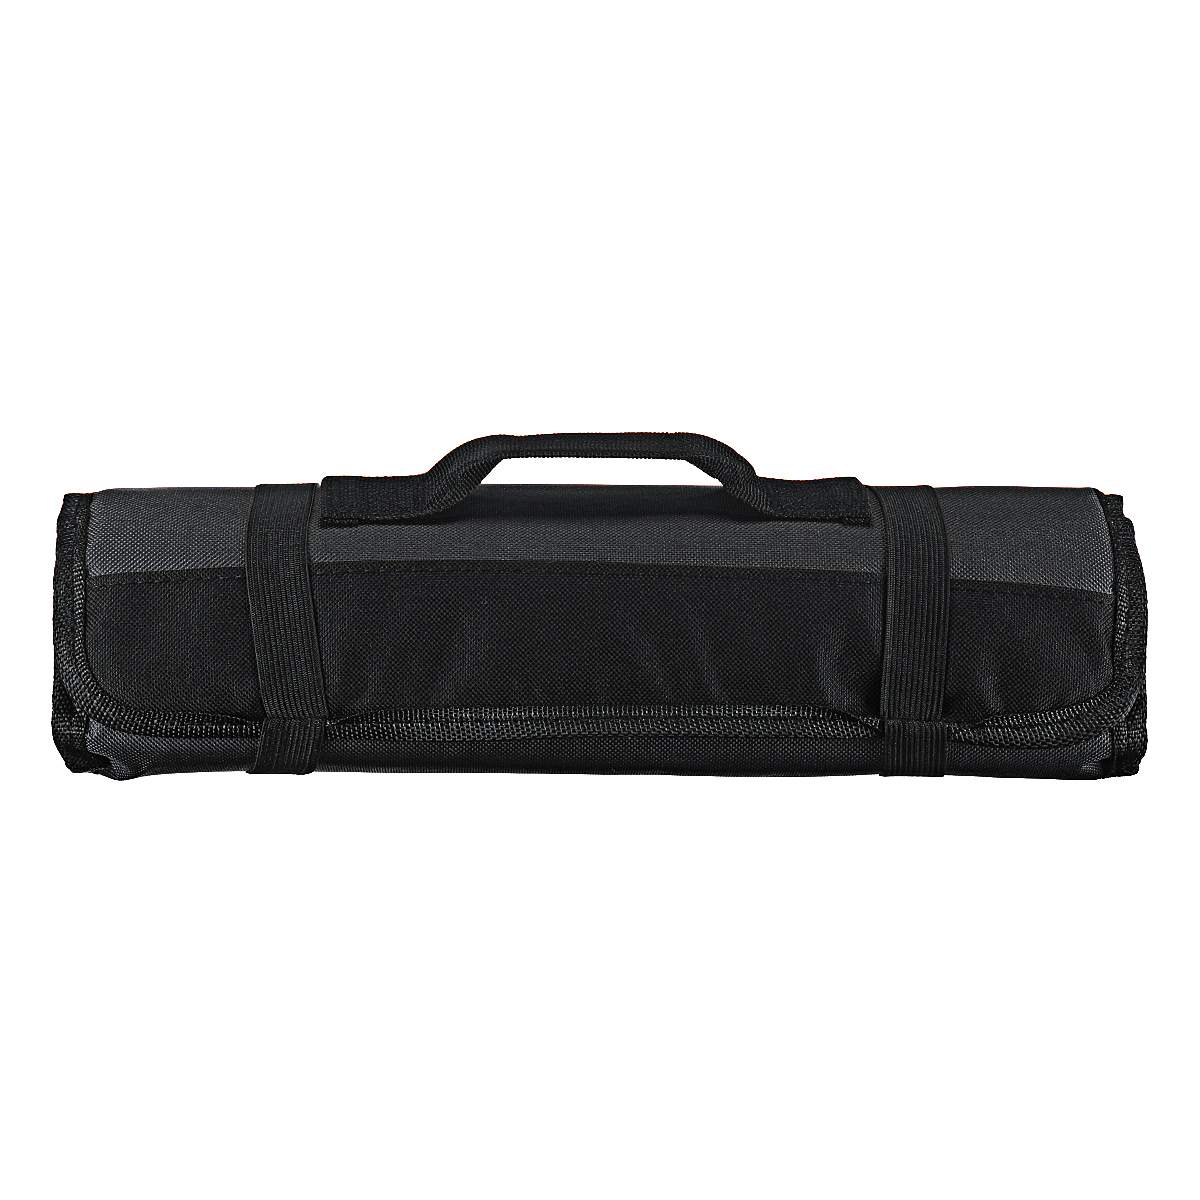 Chef Knife Bag Roll Bag Carry Case Kitchen Cooking Portable Storage Bag with 22 Poc kets Black/Green/Blue Durable